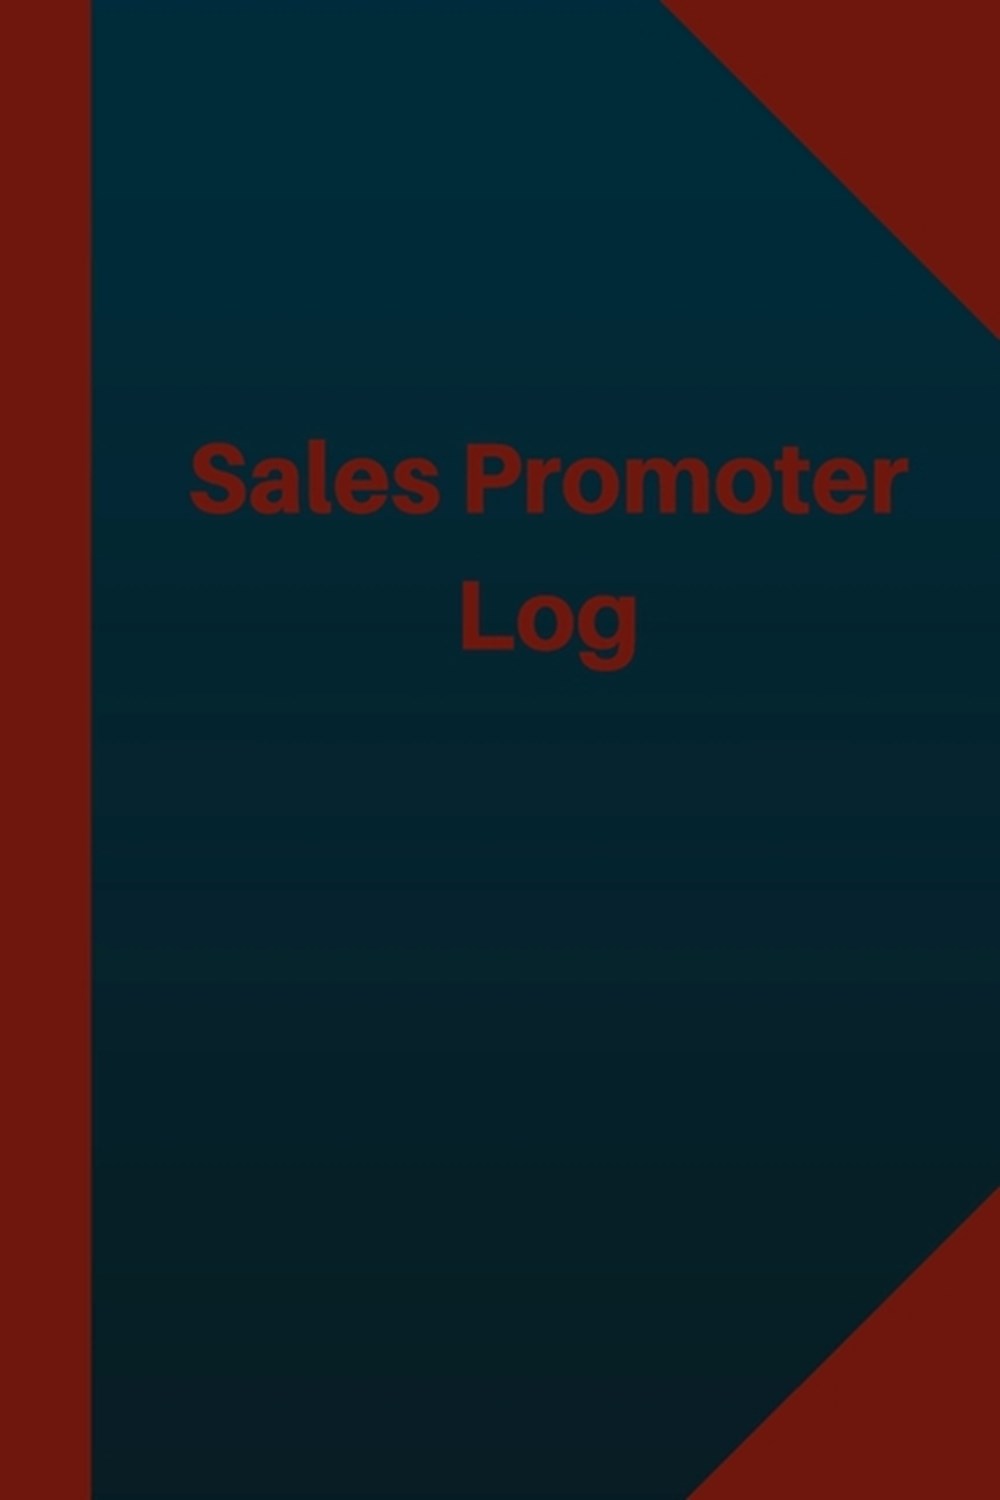 Sales Promoter Log (Logbook, Journal - 124 pages 6x9 inches) Sales Promoter Logbook (Blue Cover, Med